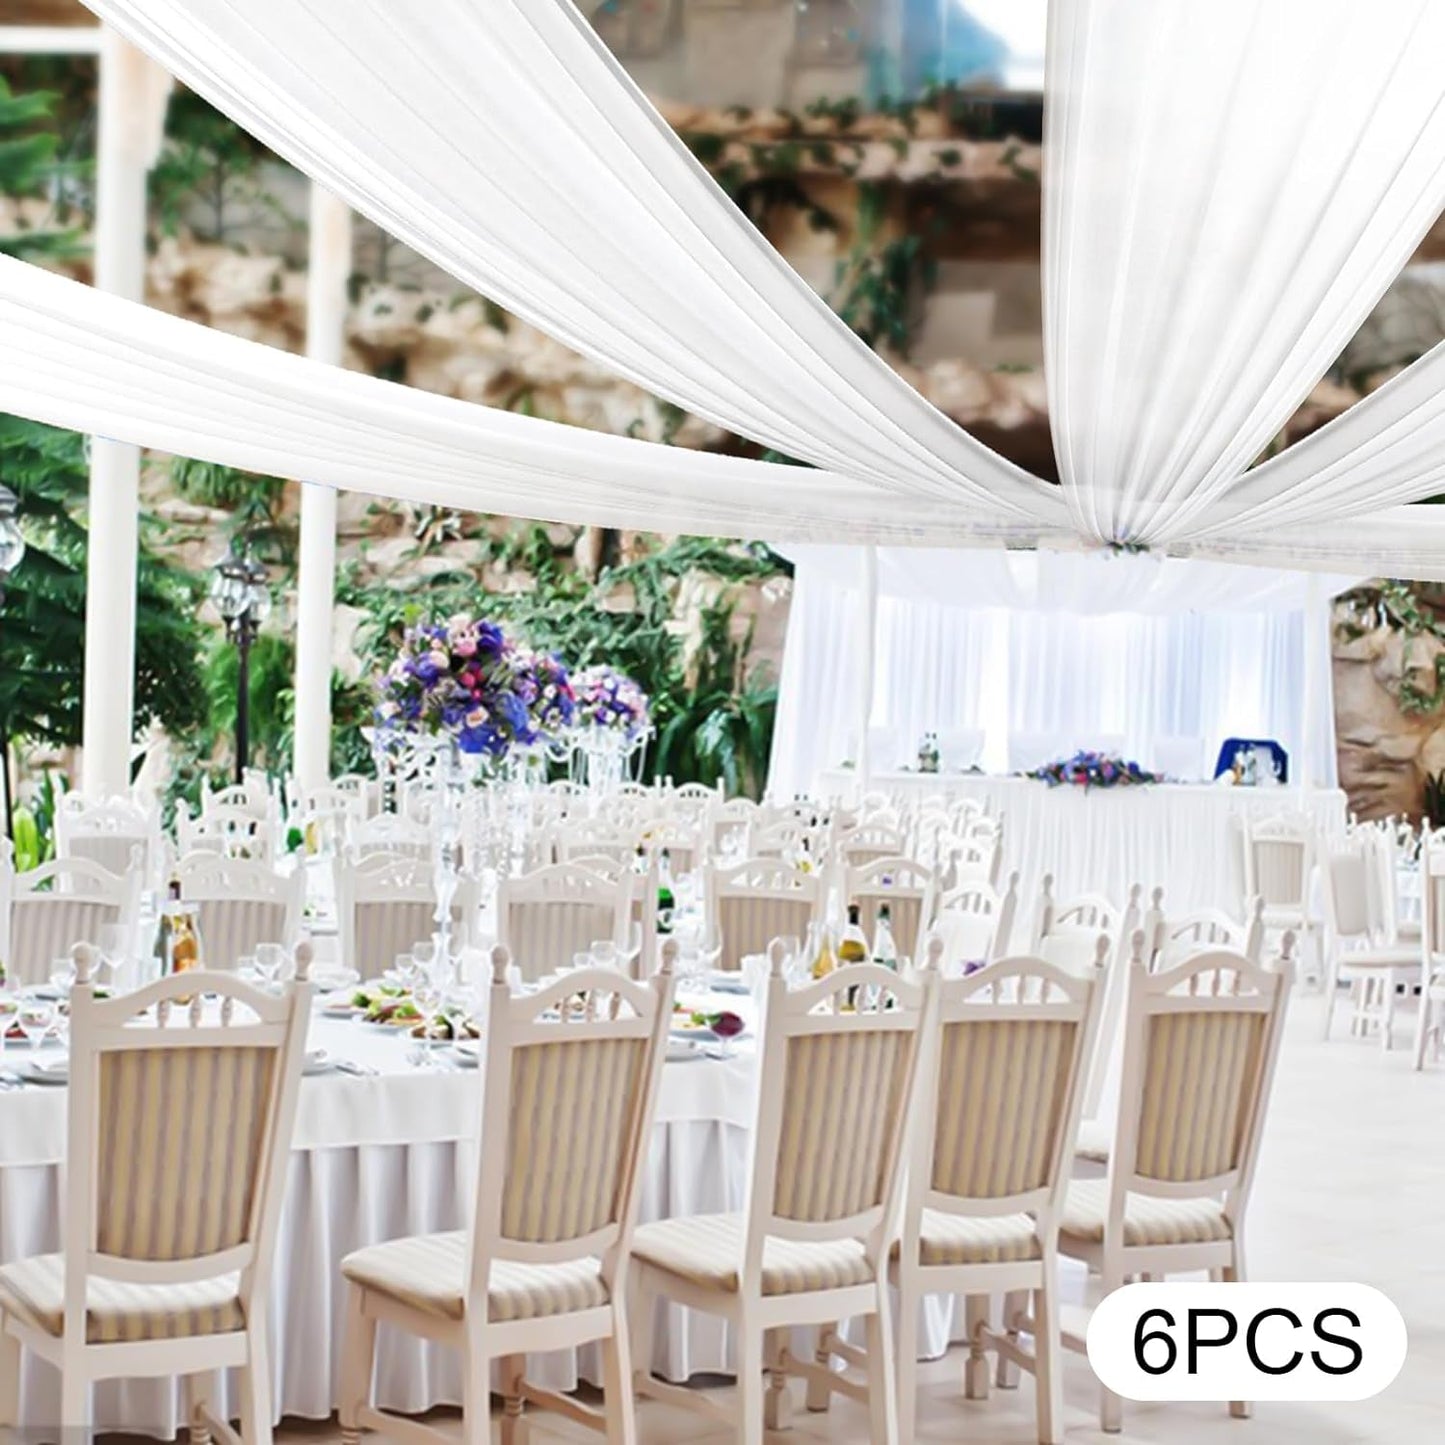 6 Panels 5Ftx15Ft Chiffon Wedding Ceiling Drapes,Arch Arbor Backdrop Fabric Curtains,Sheer Swag Stage DIY Tent Decoration for Wedding Party Ceremony (White)